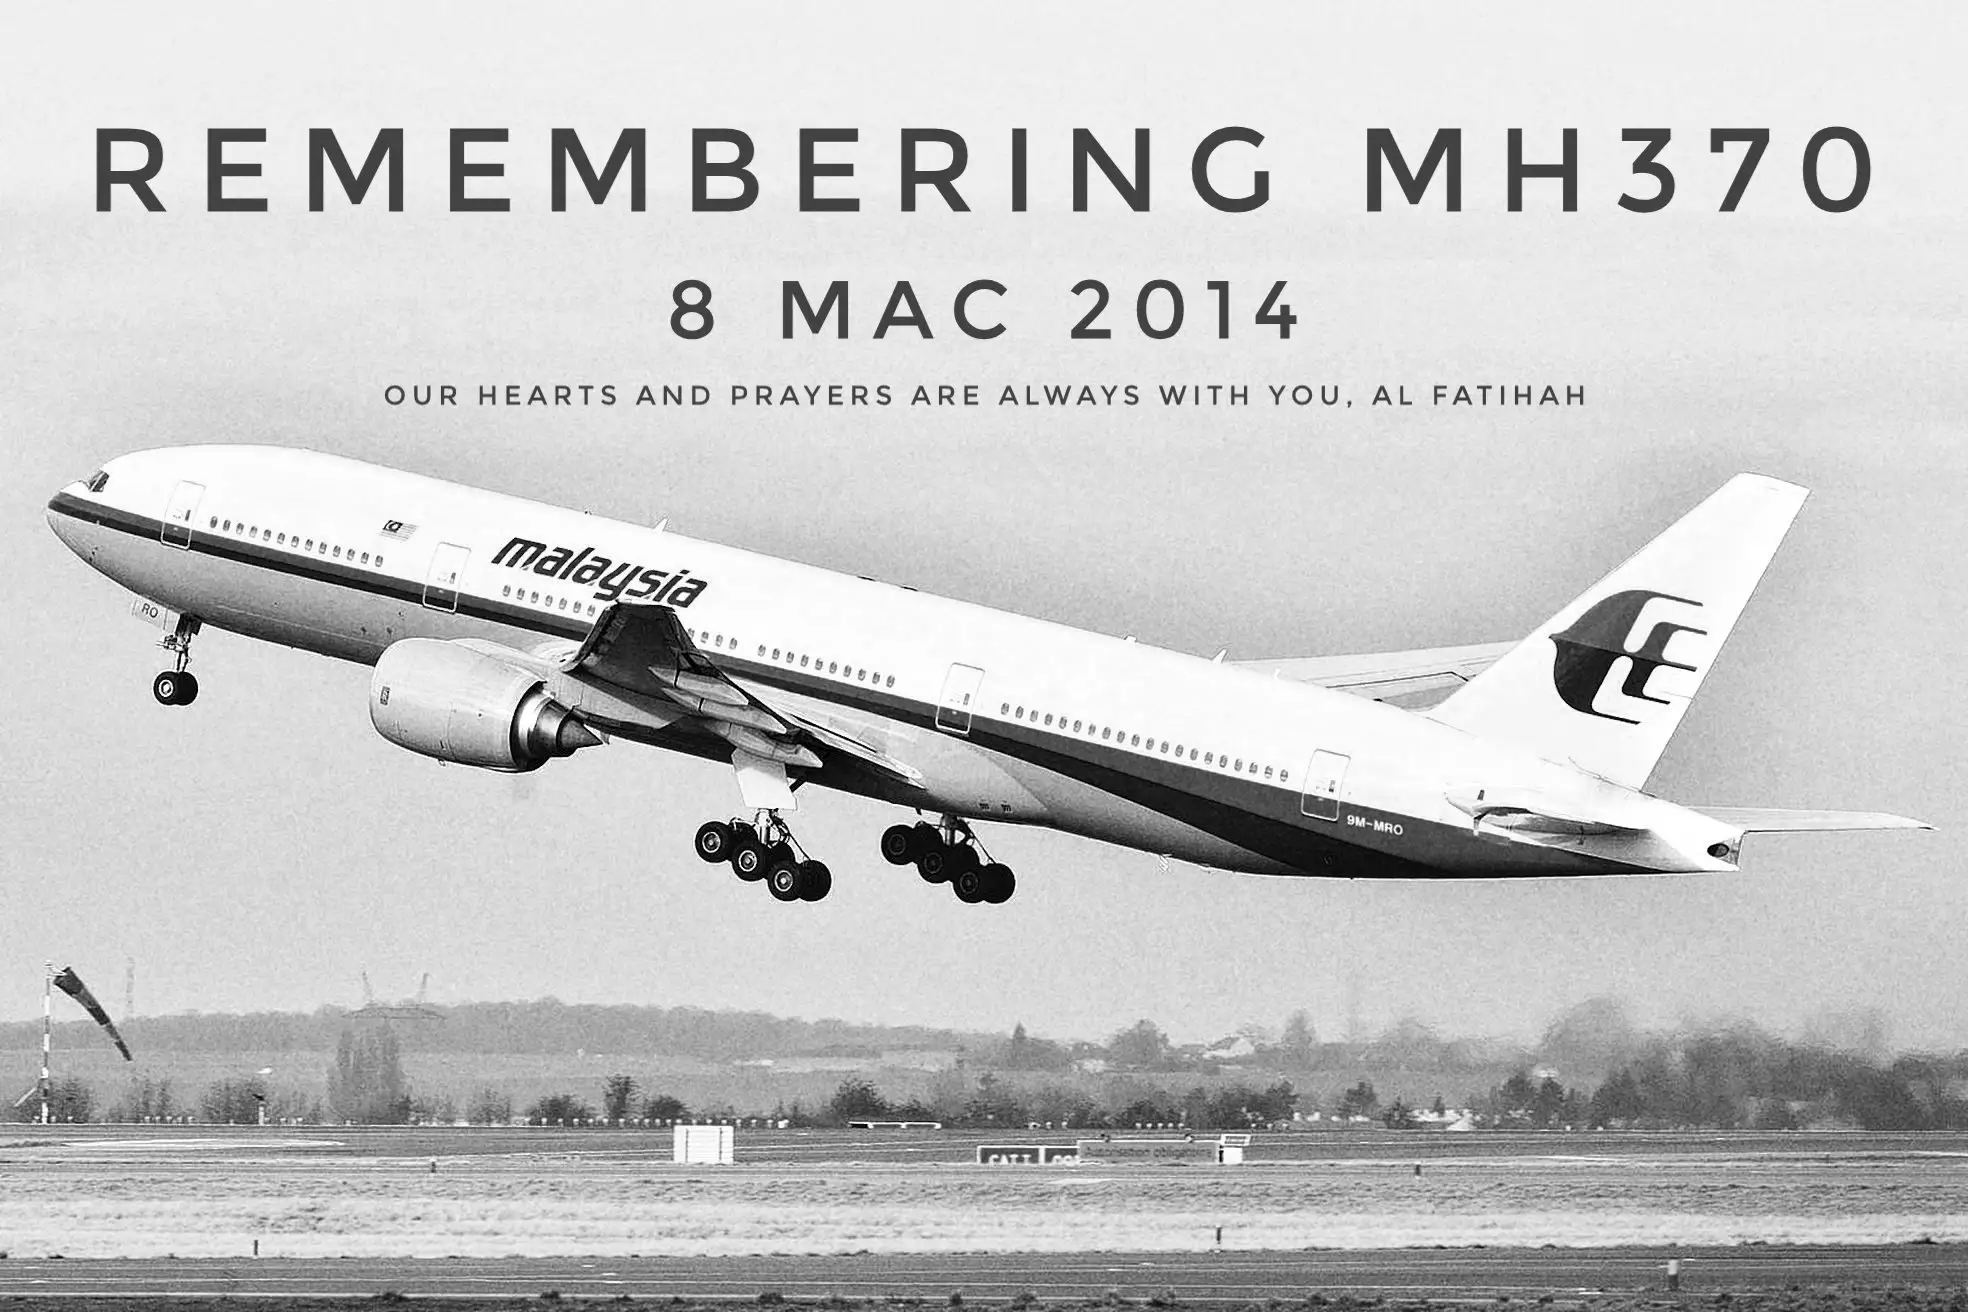 A poster remembering mh370